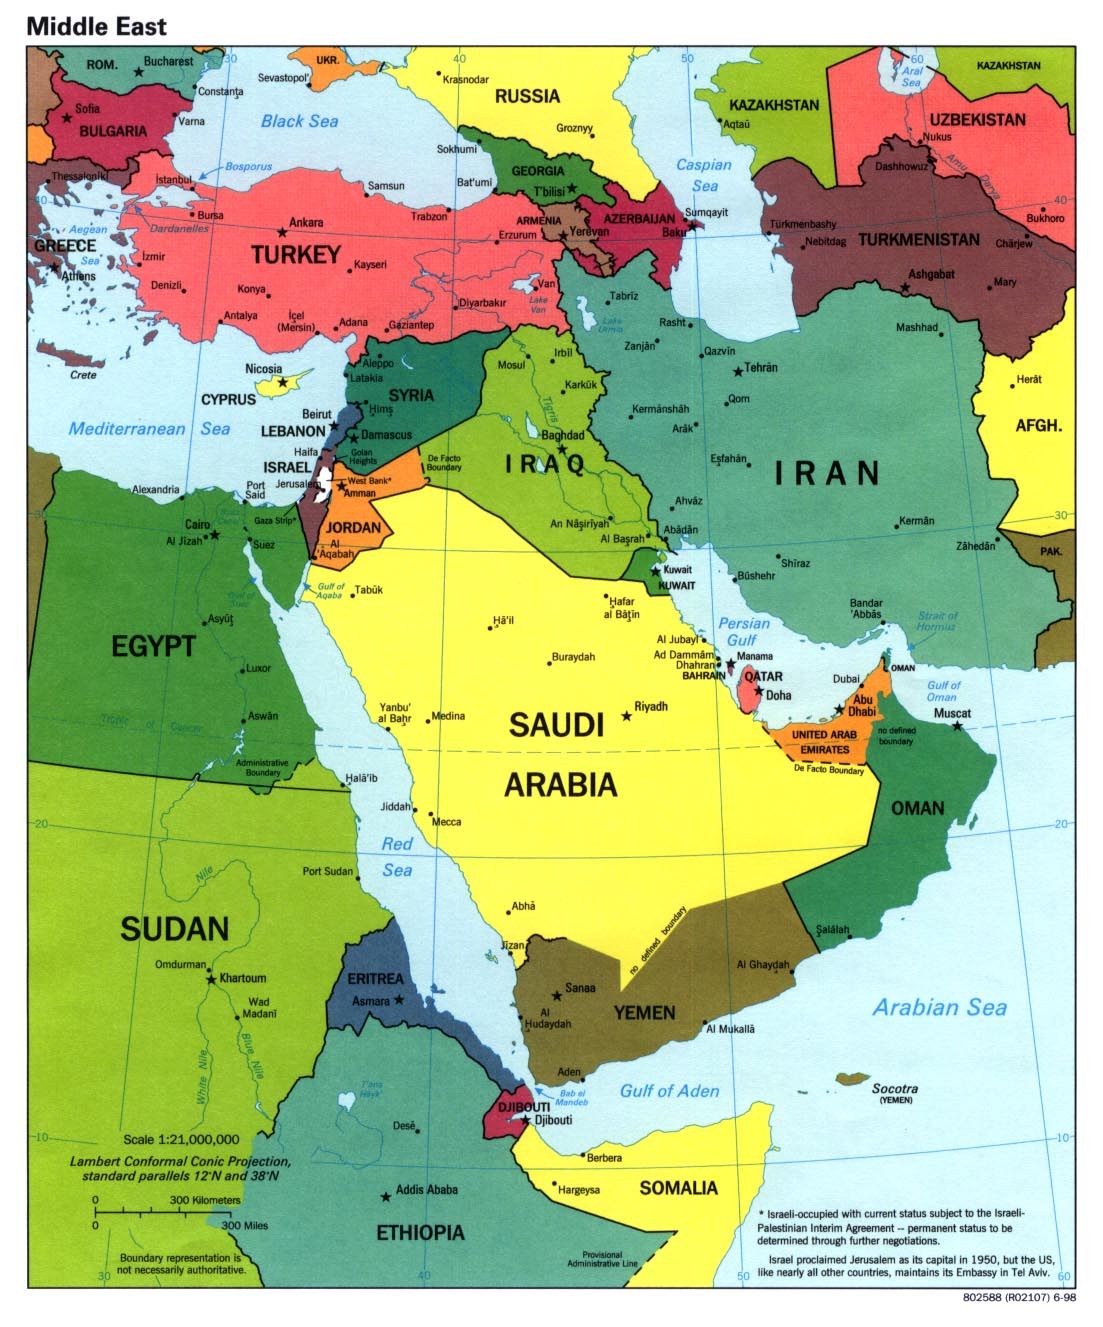 You are currently viewing Isaiah 19:18-25 God’s Peace plan for the Middle East through Messiah